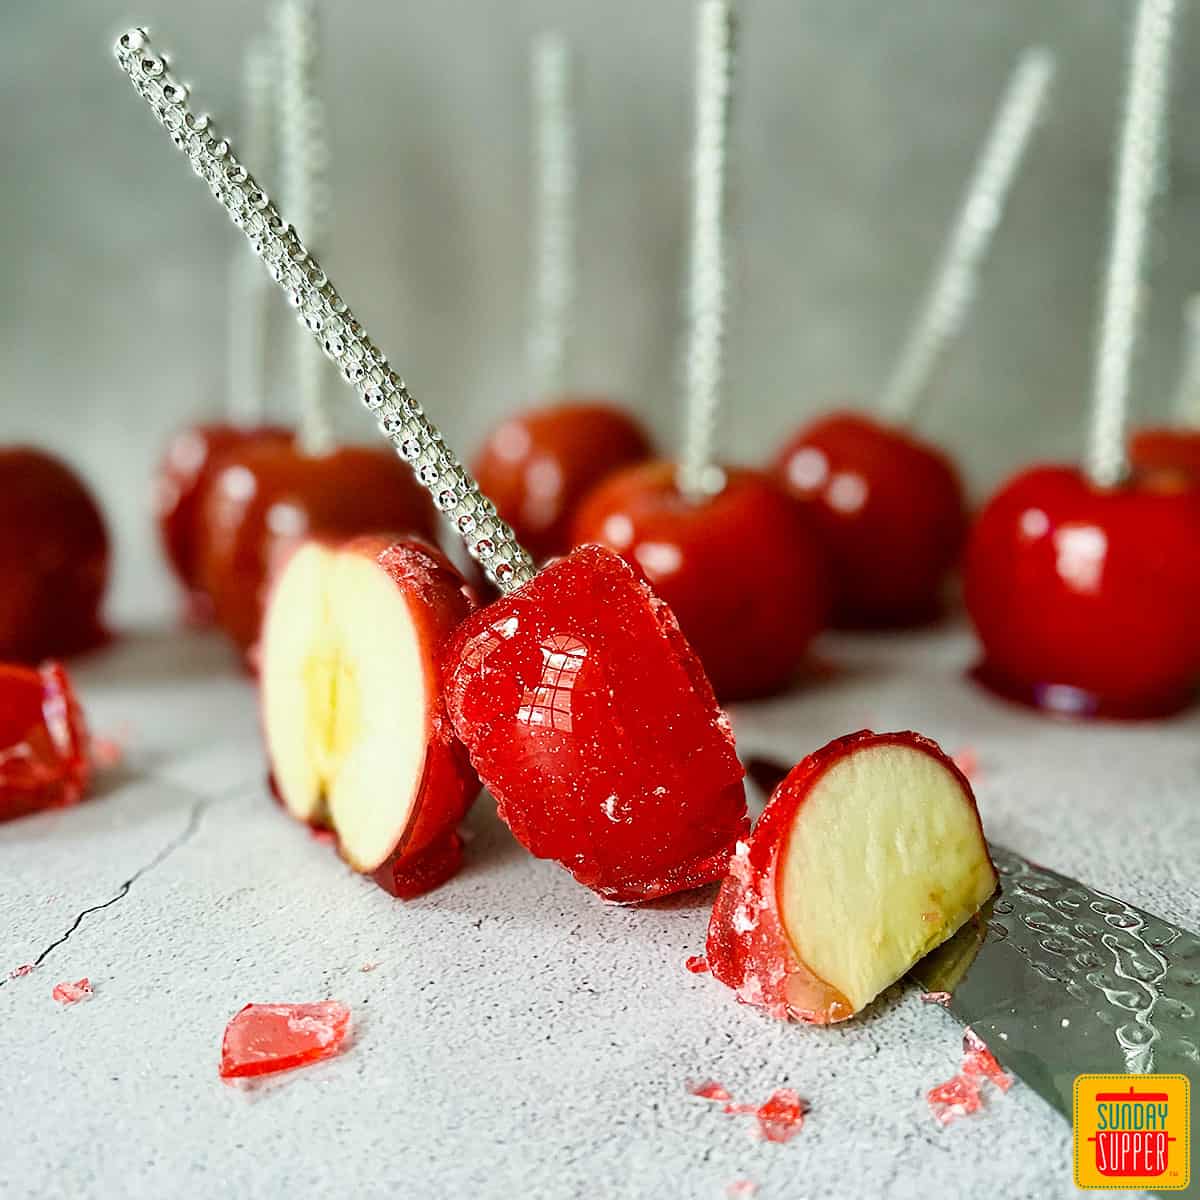 red candied apple slices with a knife